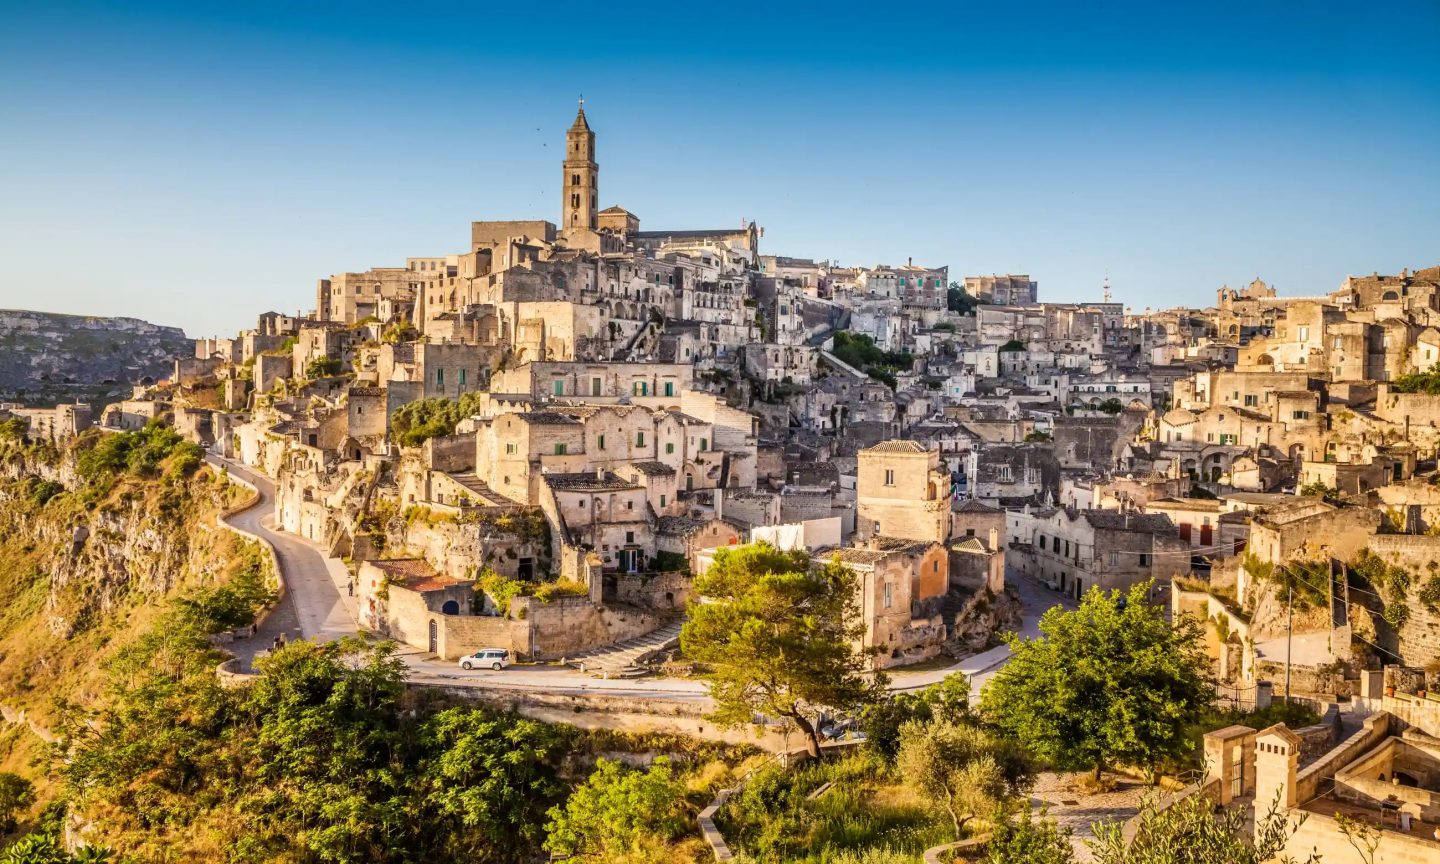 Holiday guide to Basilicata, Italy: what to see plus the best restaurants and hotels